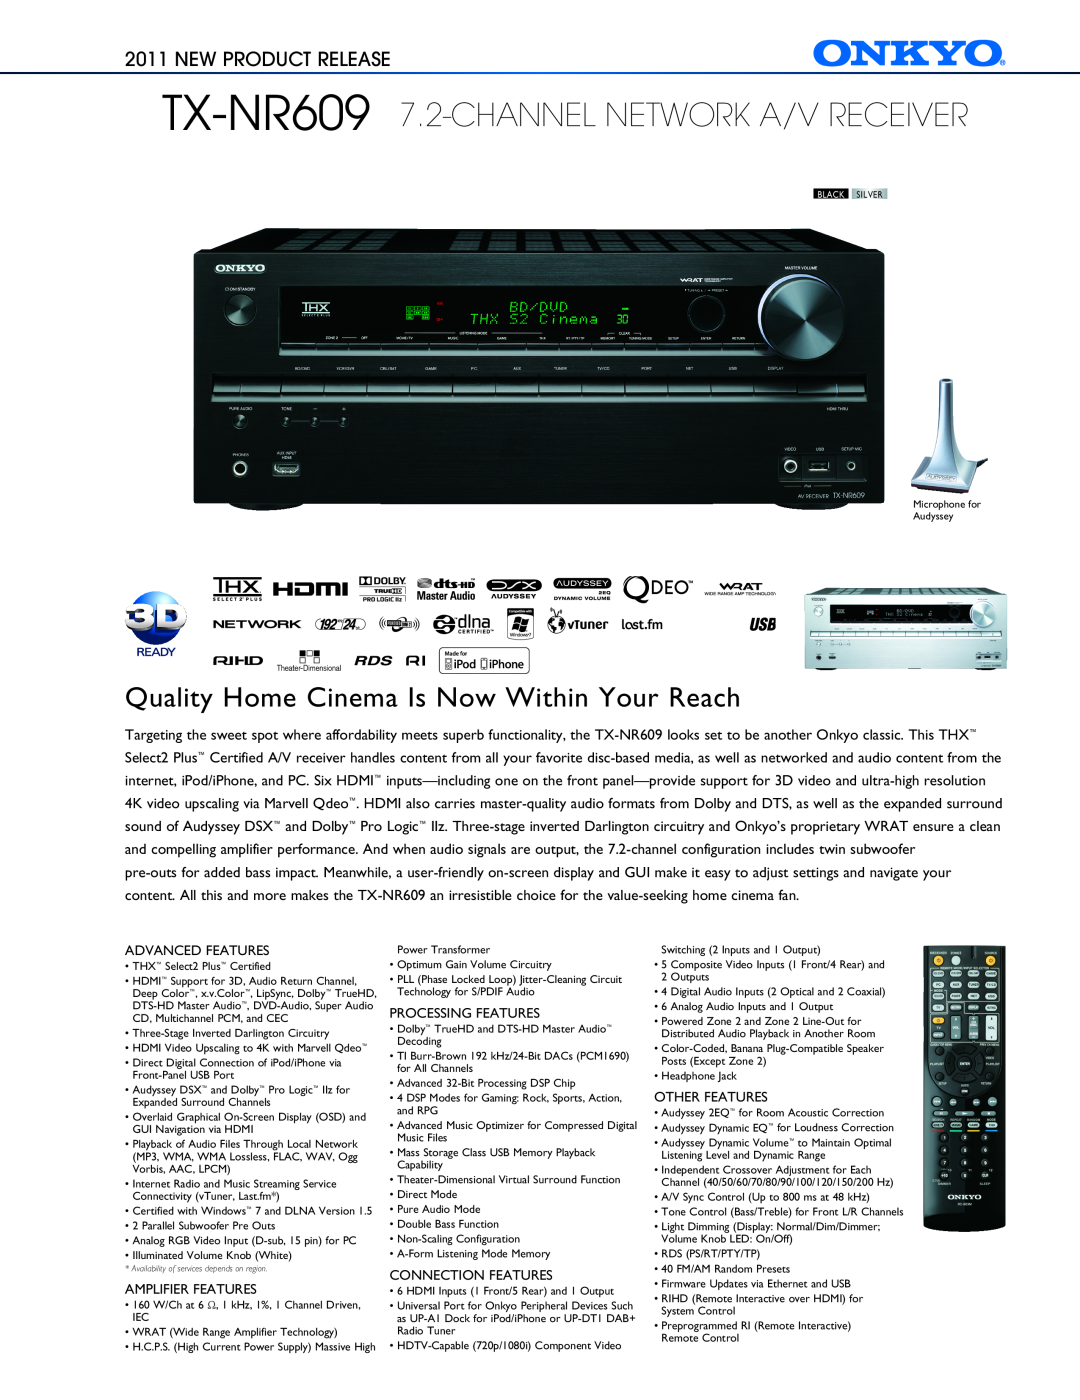 Onkyo TX-NR609 manual Advanced Features, Amplifier Features, Processing Features, Connection Features, Other Features 